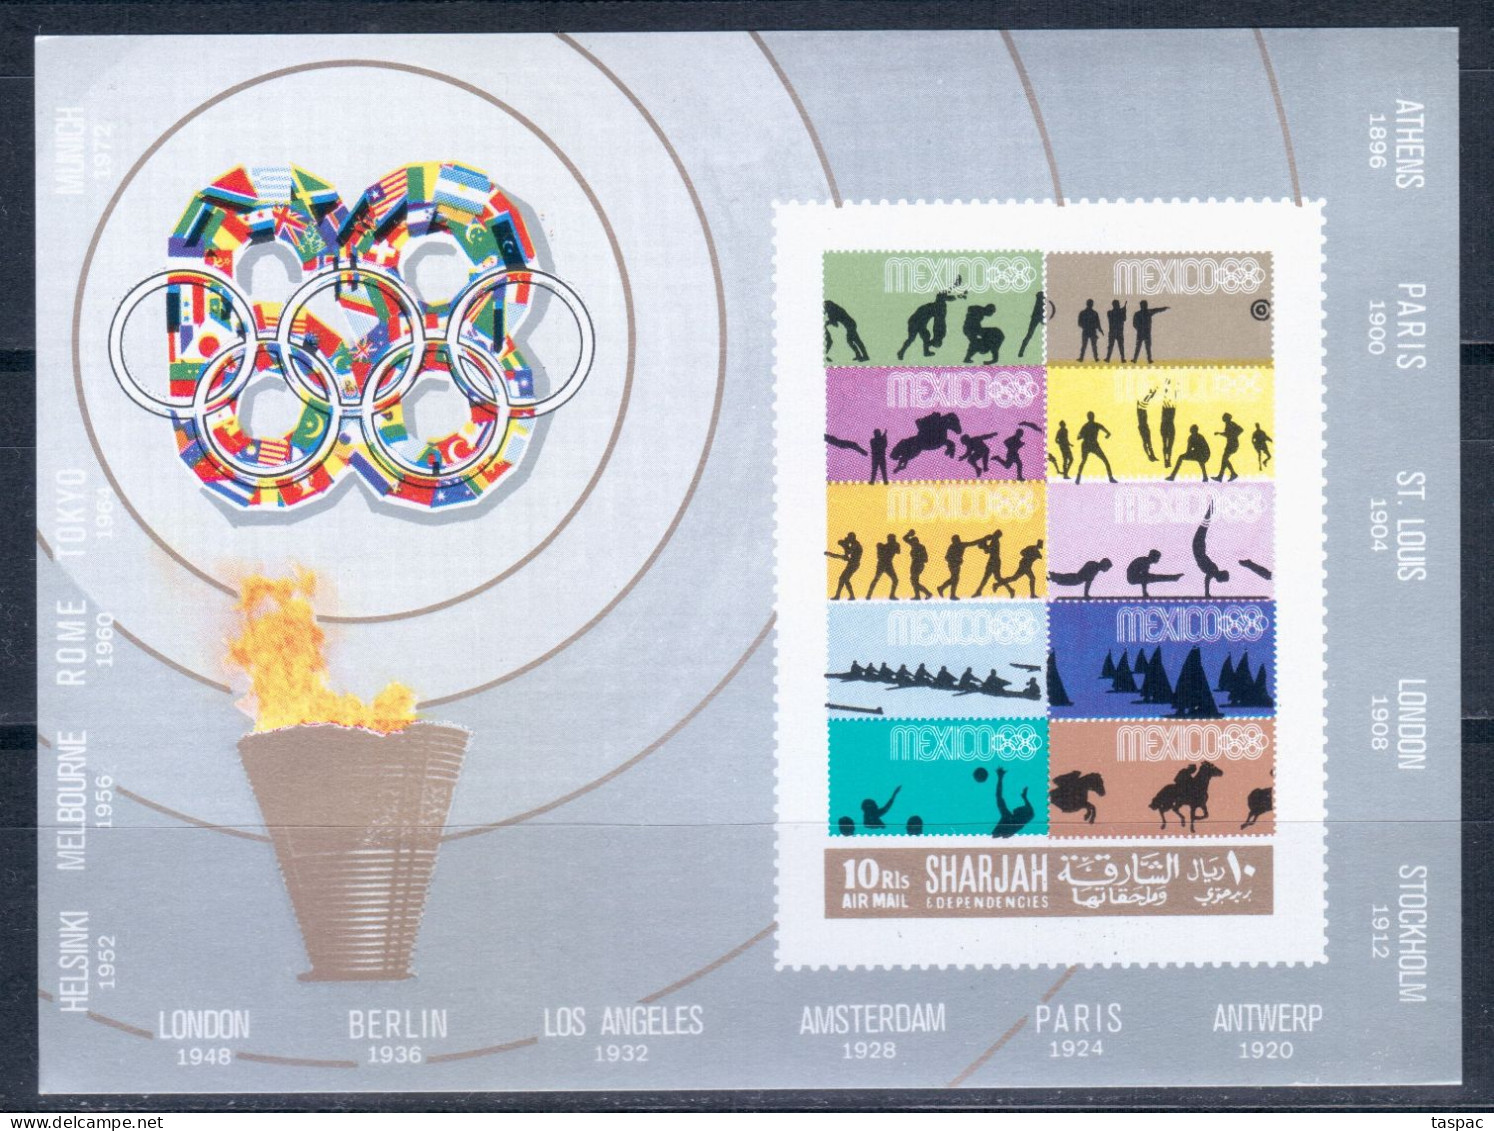 Sharjah 1968 Mi# Block 43 B ** MNH - Imperf. - Summer Olympics, Mexico '68 / Stamps On Stamps - Sharjah